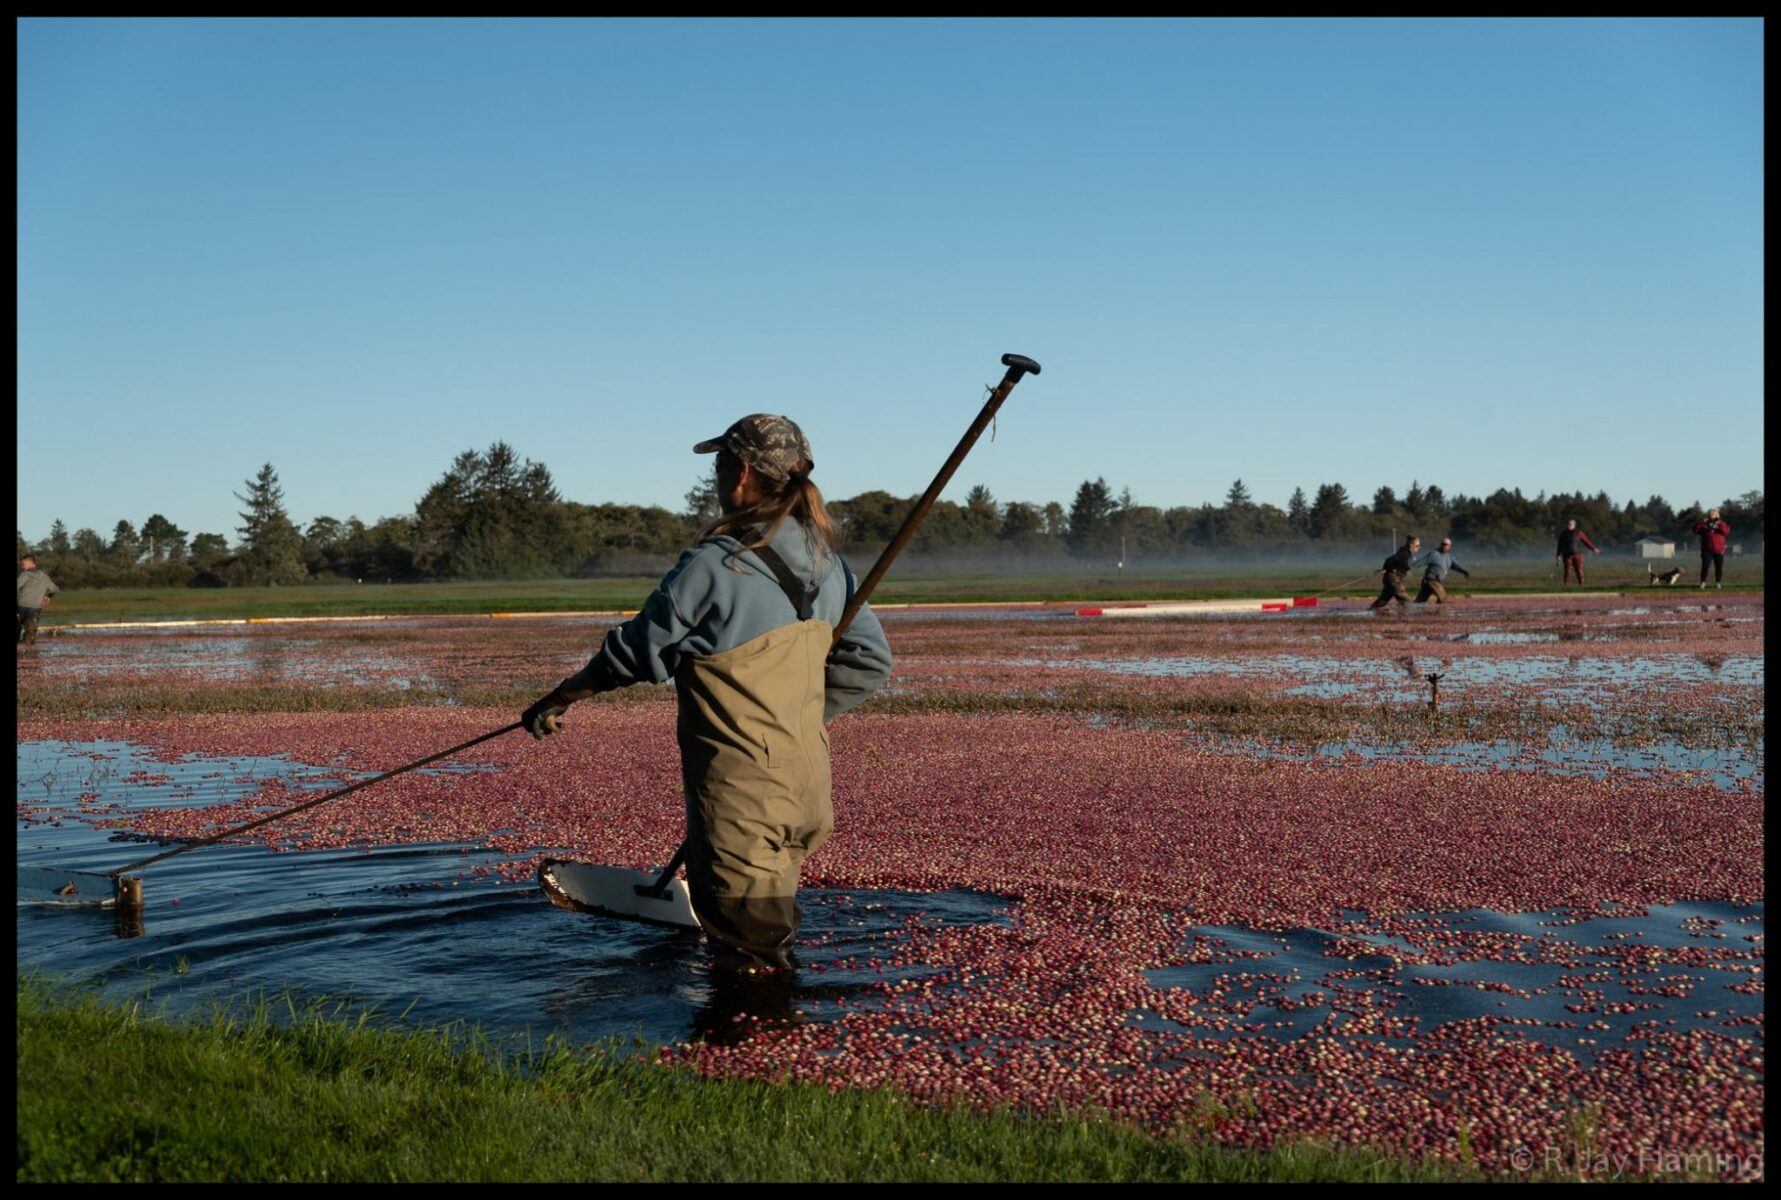 cranberries floating on the surface of the bog. They are being gathered behind a boom. It's a sunny day and there is forest in the distance